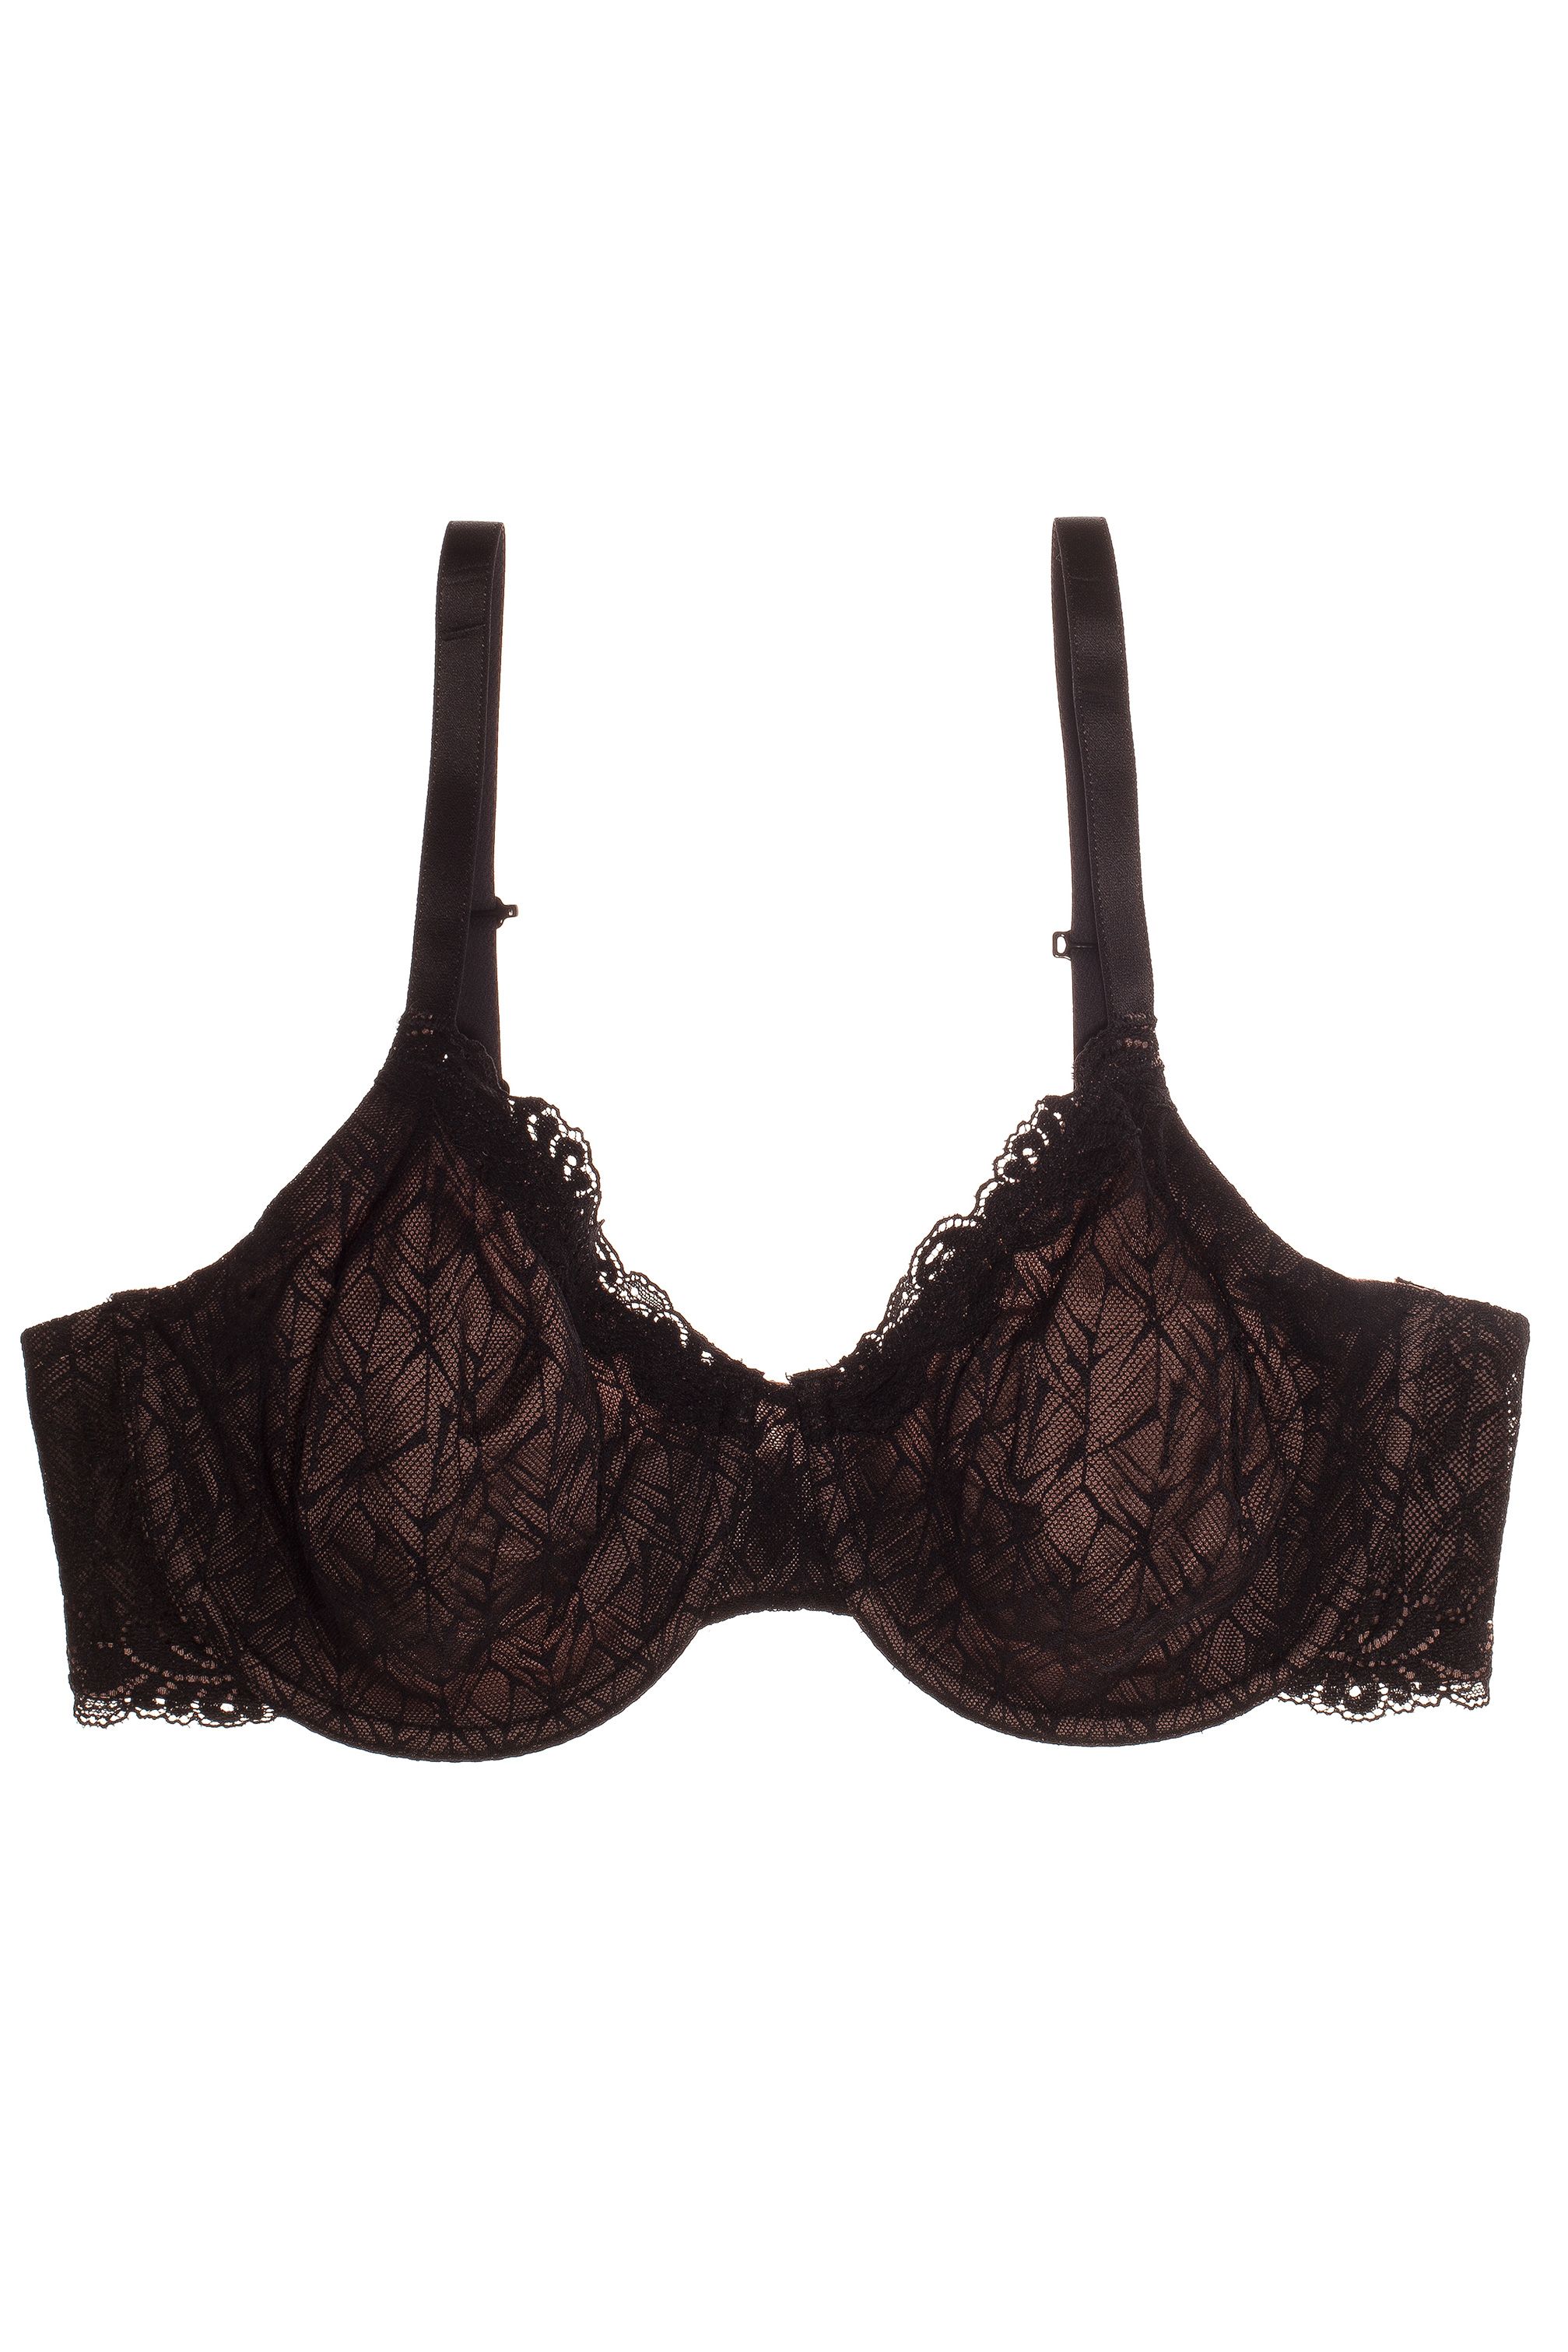 REVEAL Midnight Black The Perfect Support Underwire Bra, US 32DDD